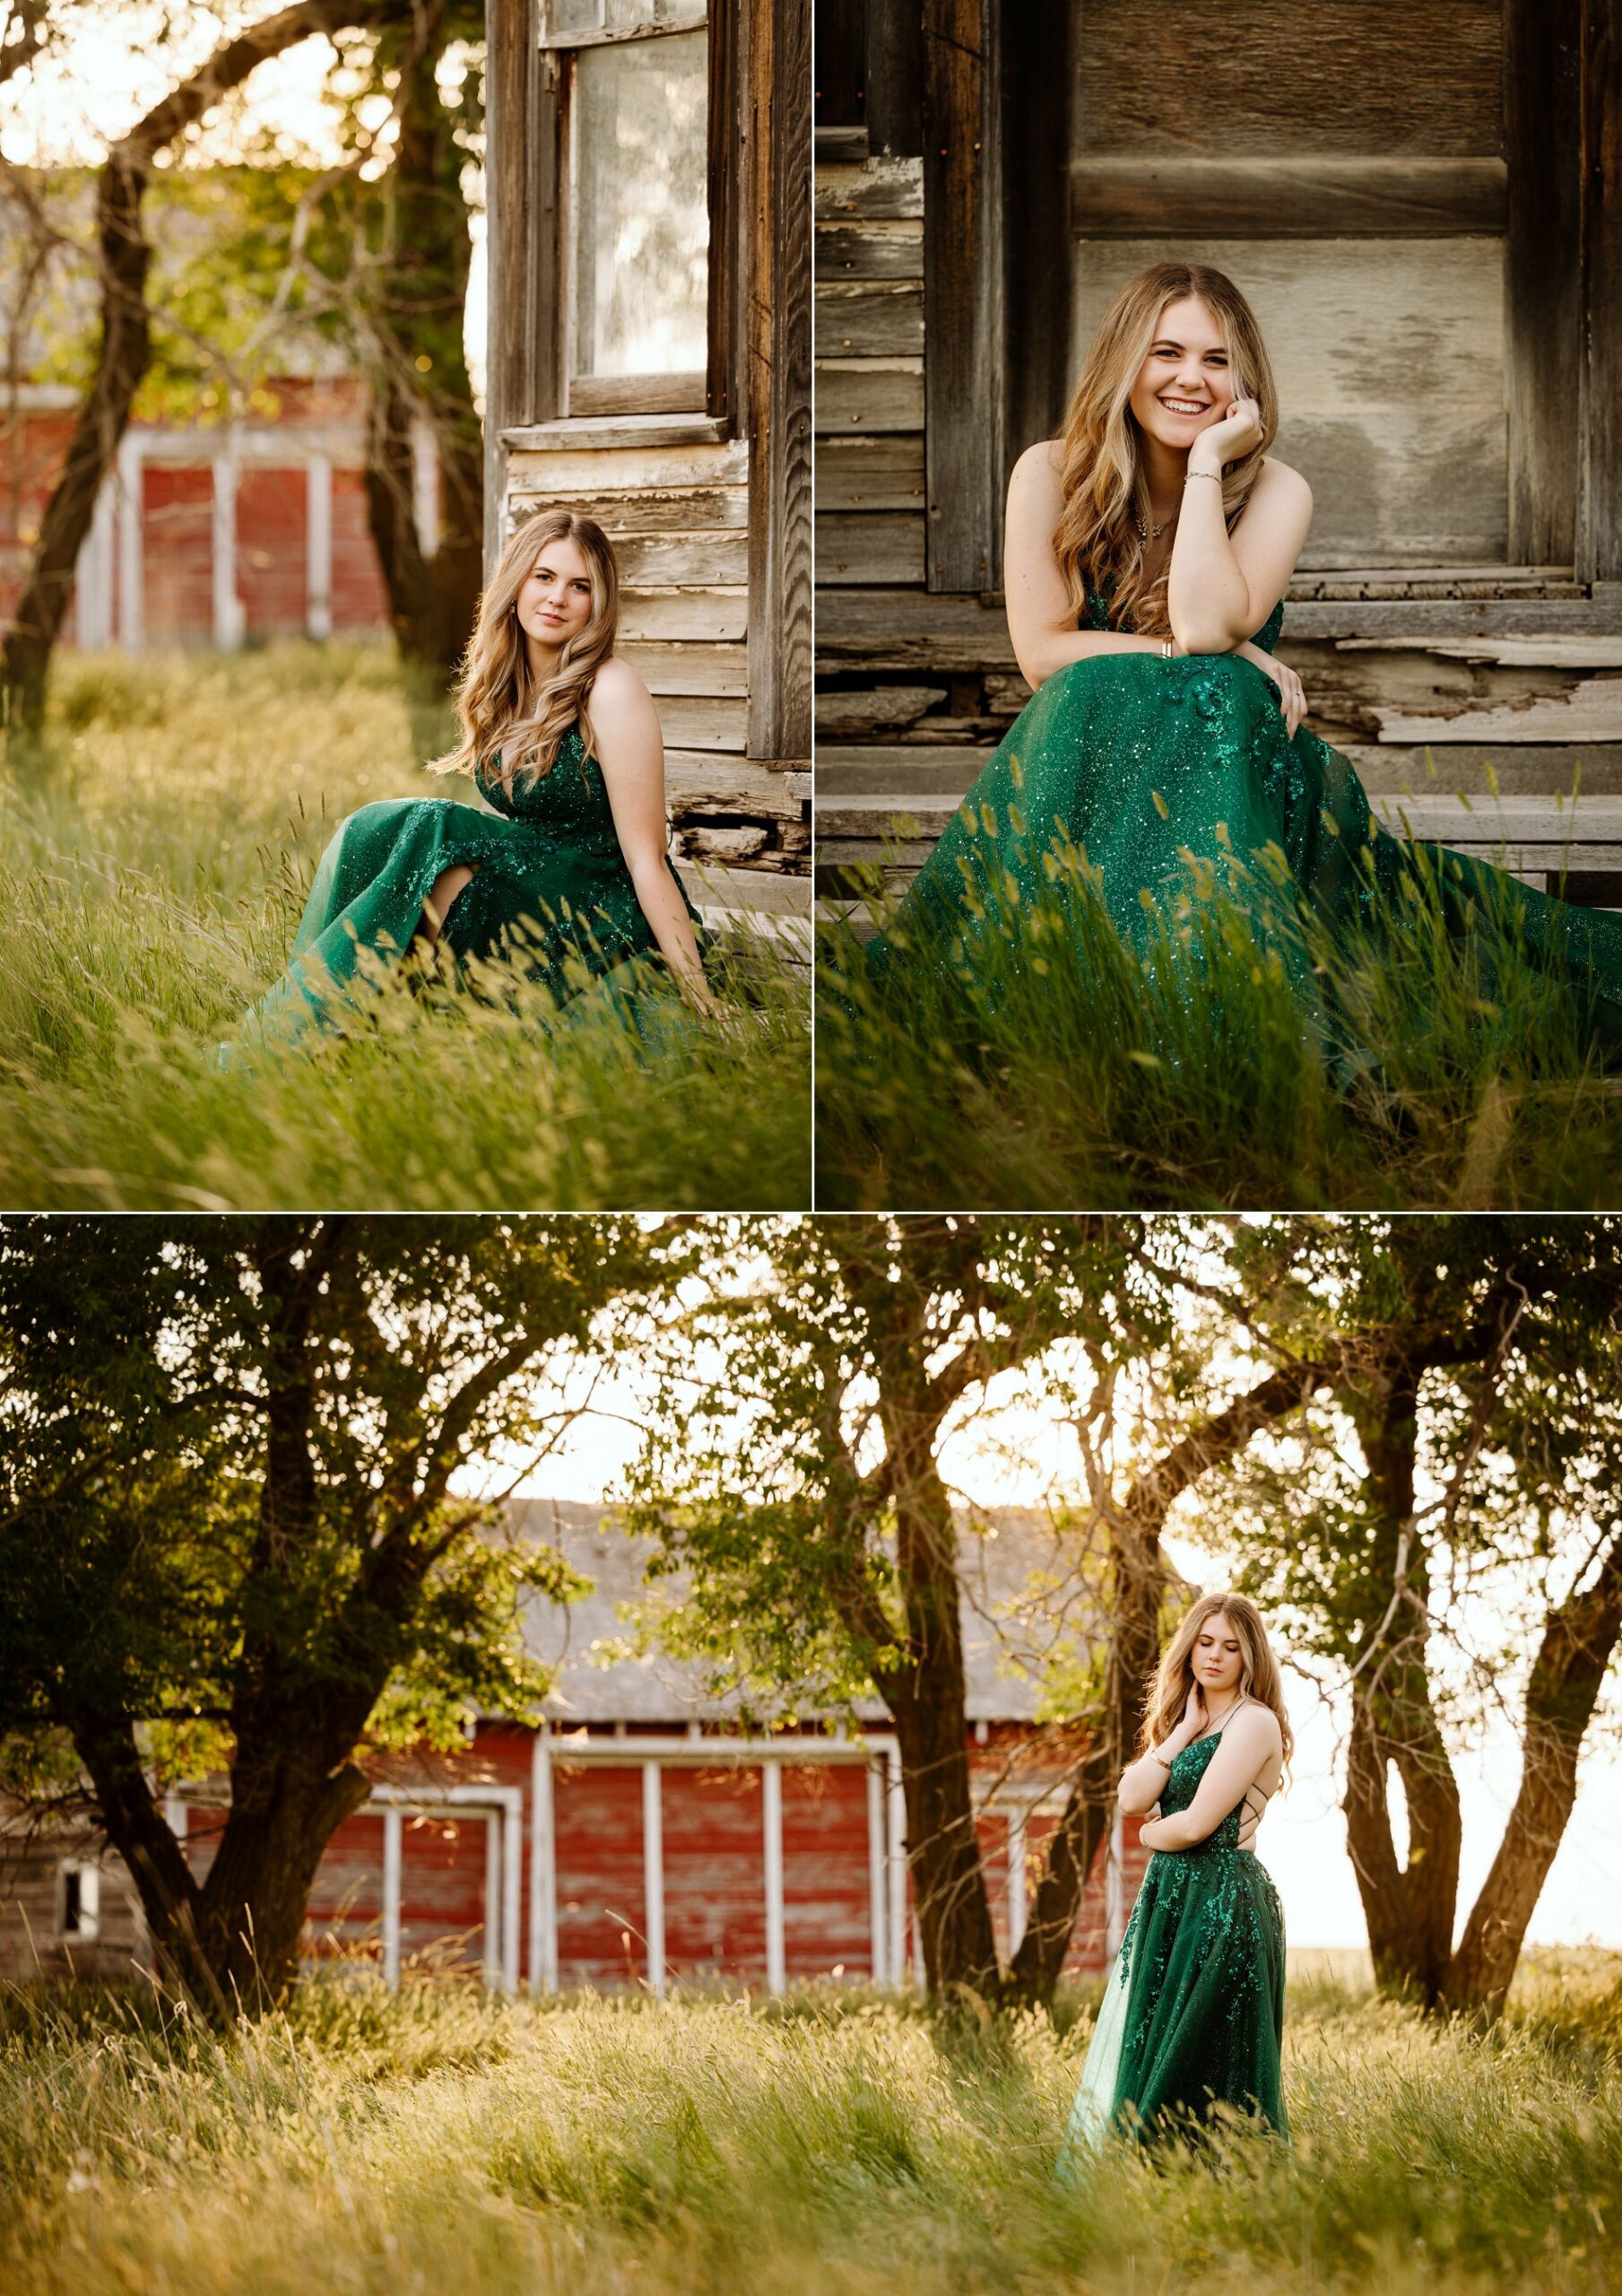 Graduation photos with abandoned buildings in a rural area at golden hour.